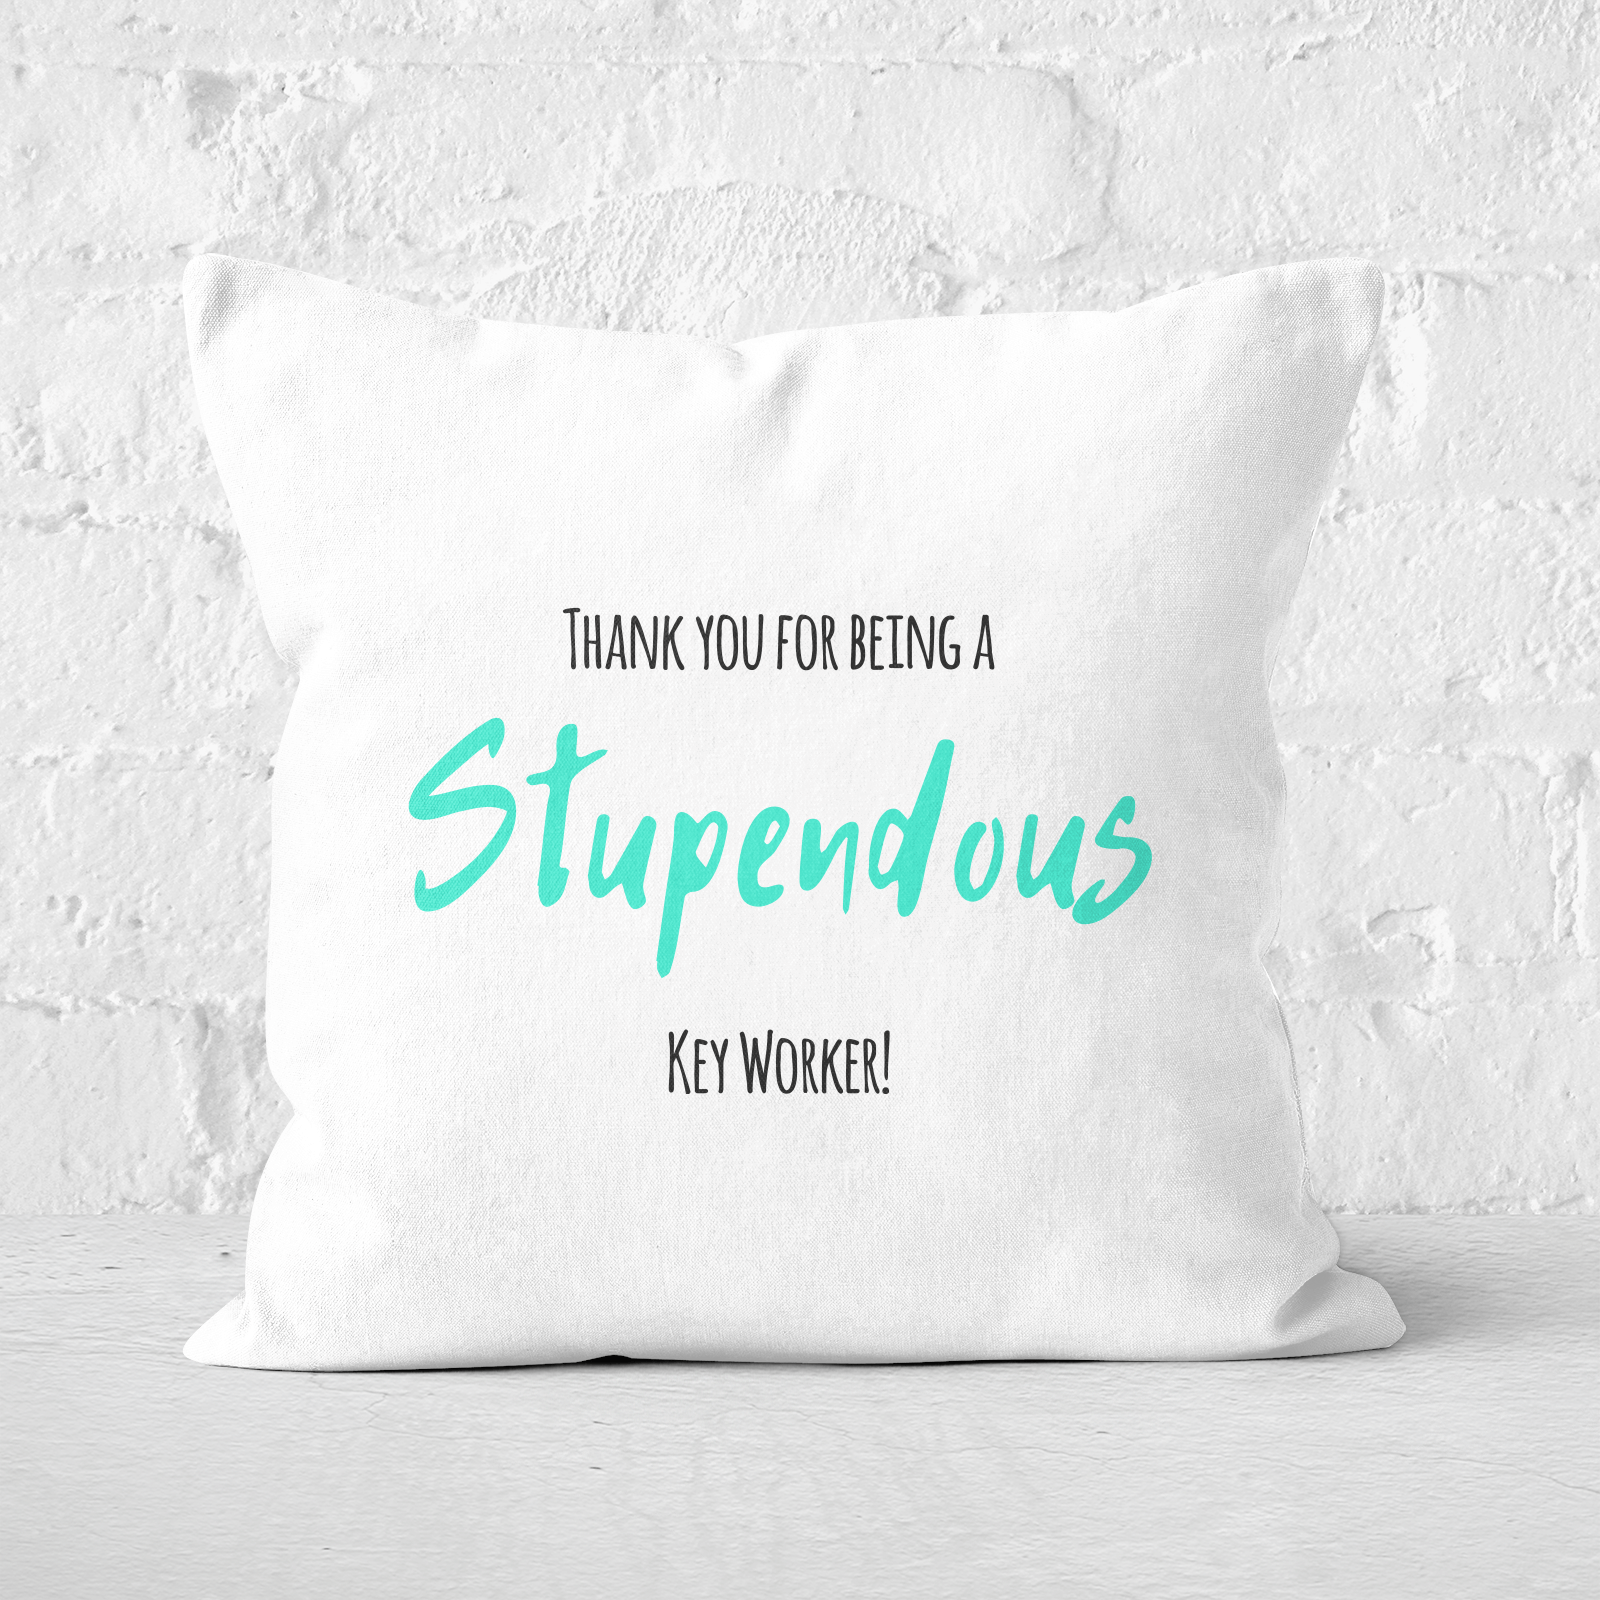 Thank You For Being A Stupendous Key Worker! Square Cushion - 60x60cm - Soft Touch